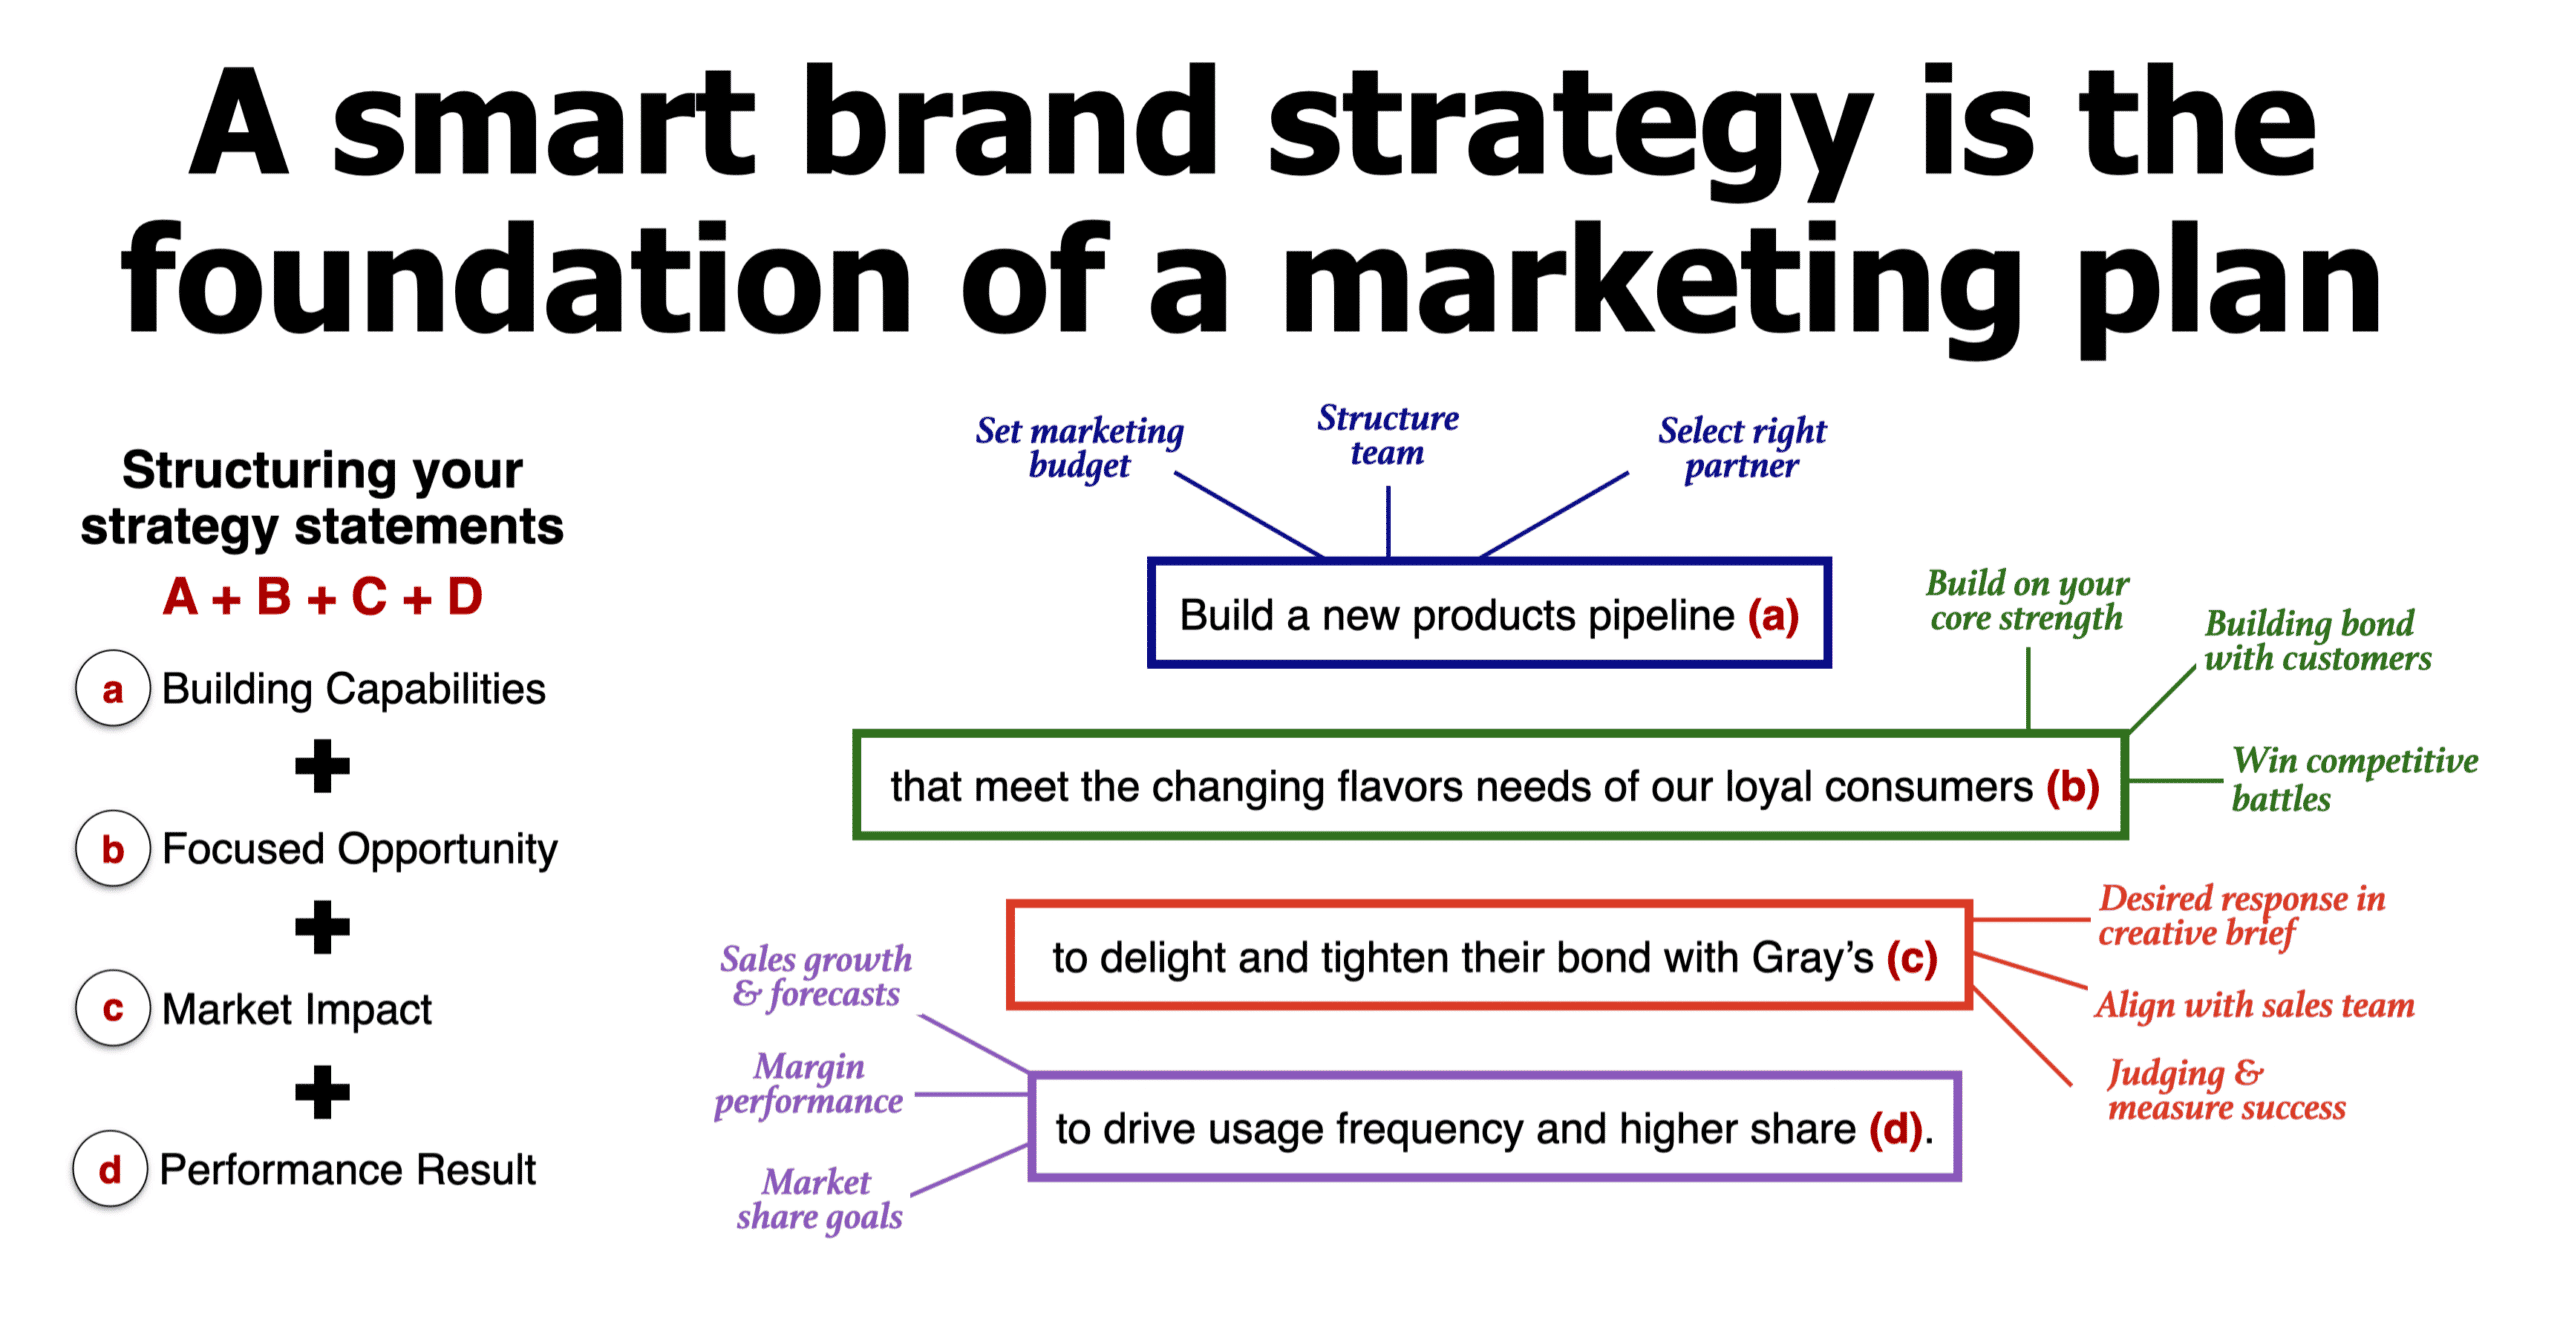 Smart brand strategy is the foundation of the marketing plan